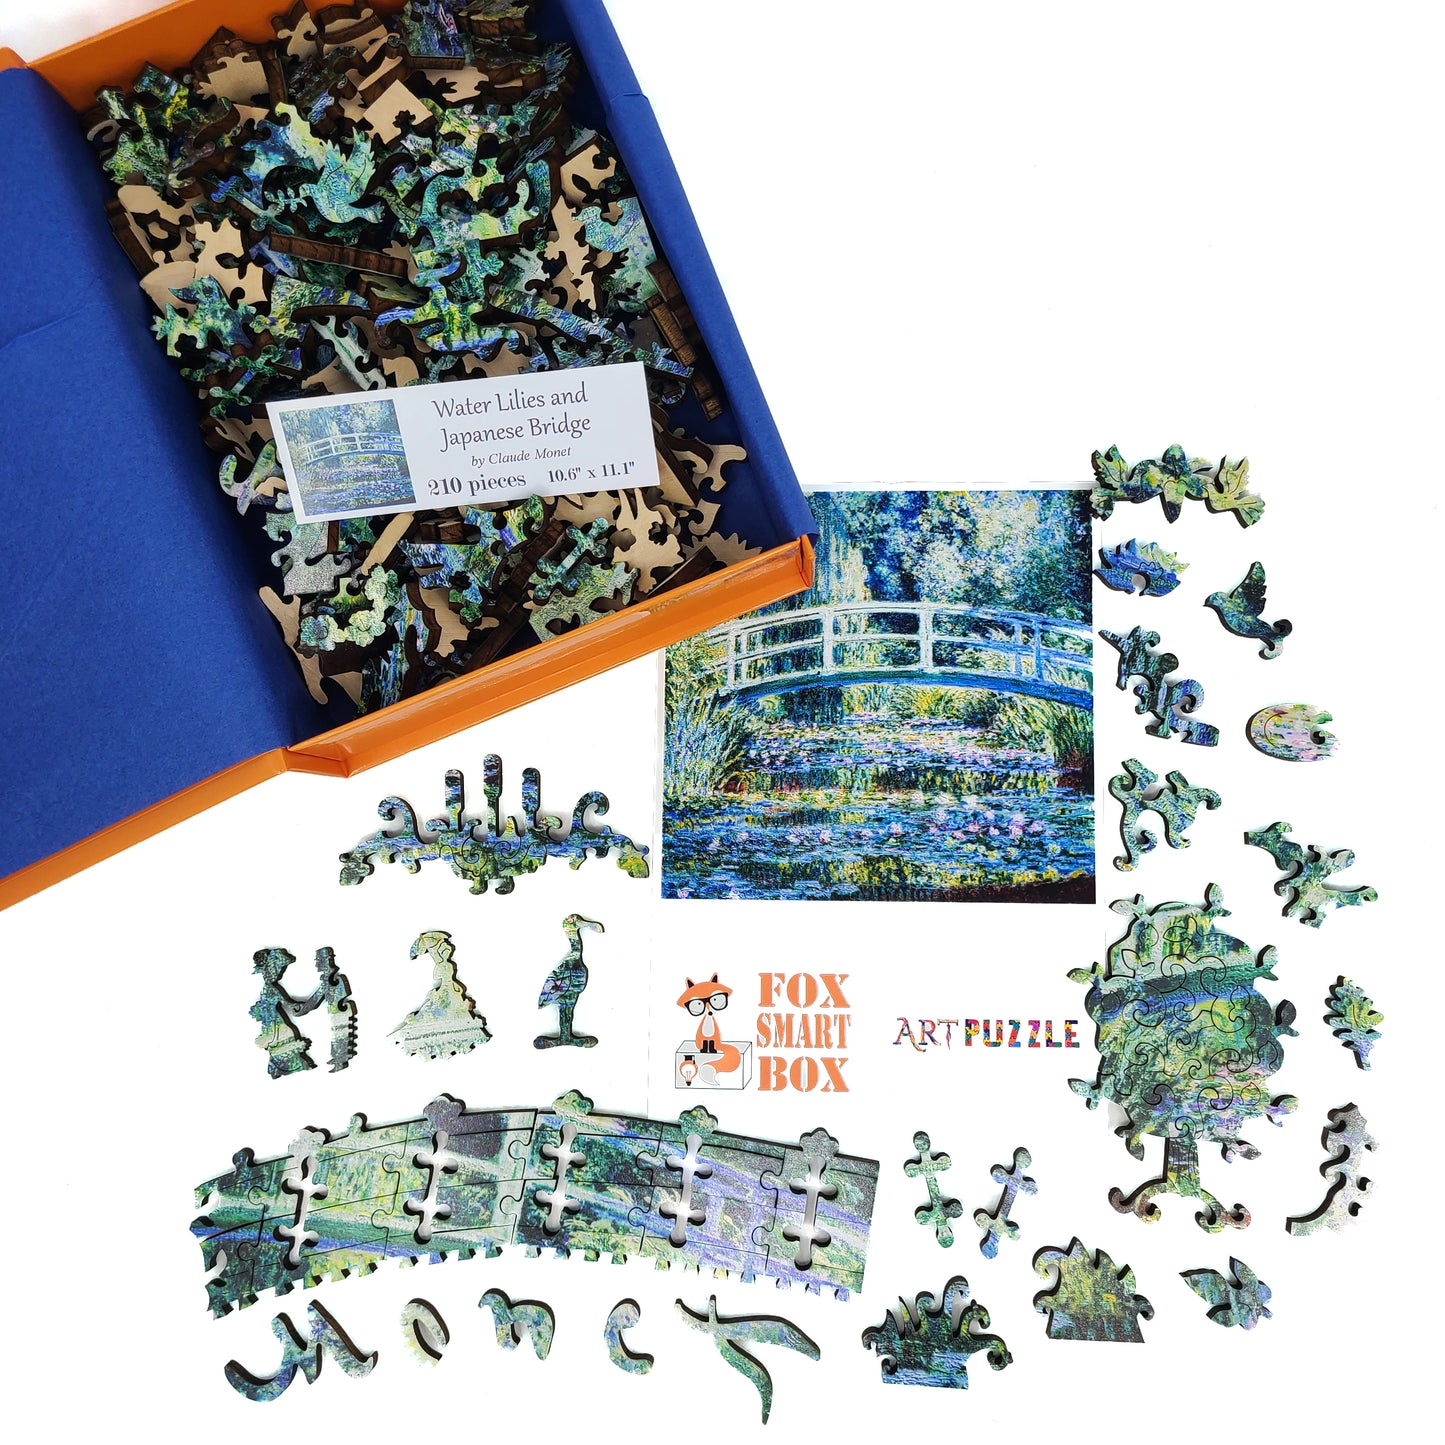 Wooden Jigsaw Puzzle with Uniquely Shaped Pieces for Adults - 210 Pieces - Water Lilies and Japanese Bridge